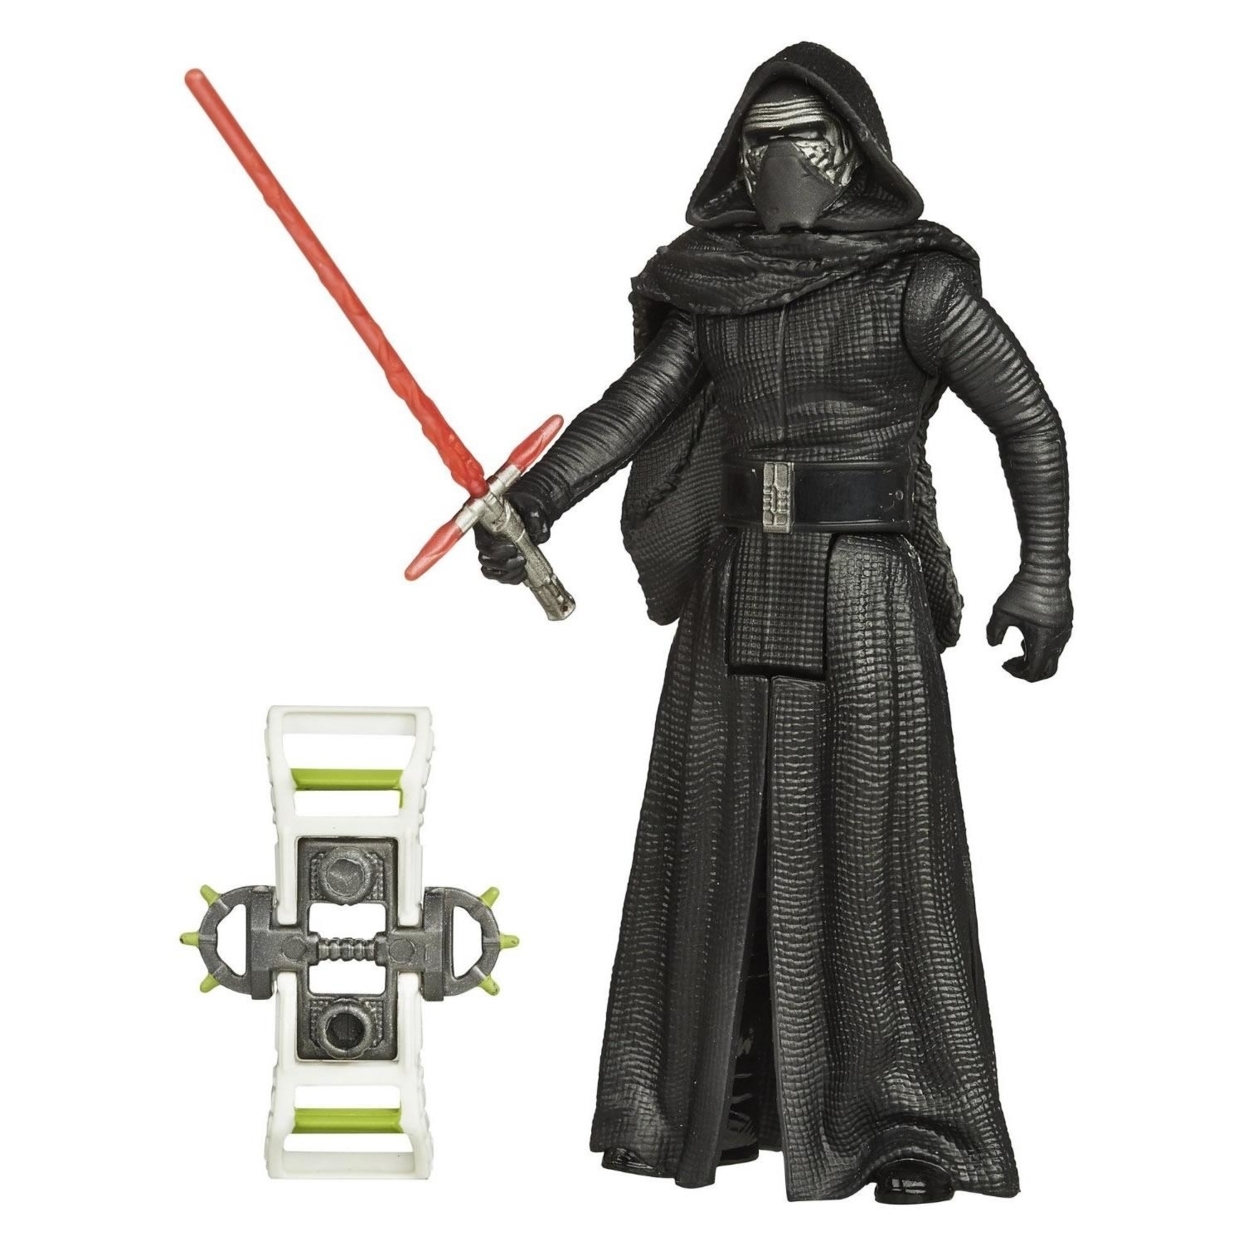 Star Wars The Force Awakens: Mission Forest Kylo Ren Action Figure Toy Hasbro